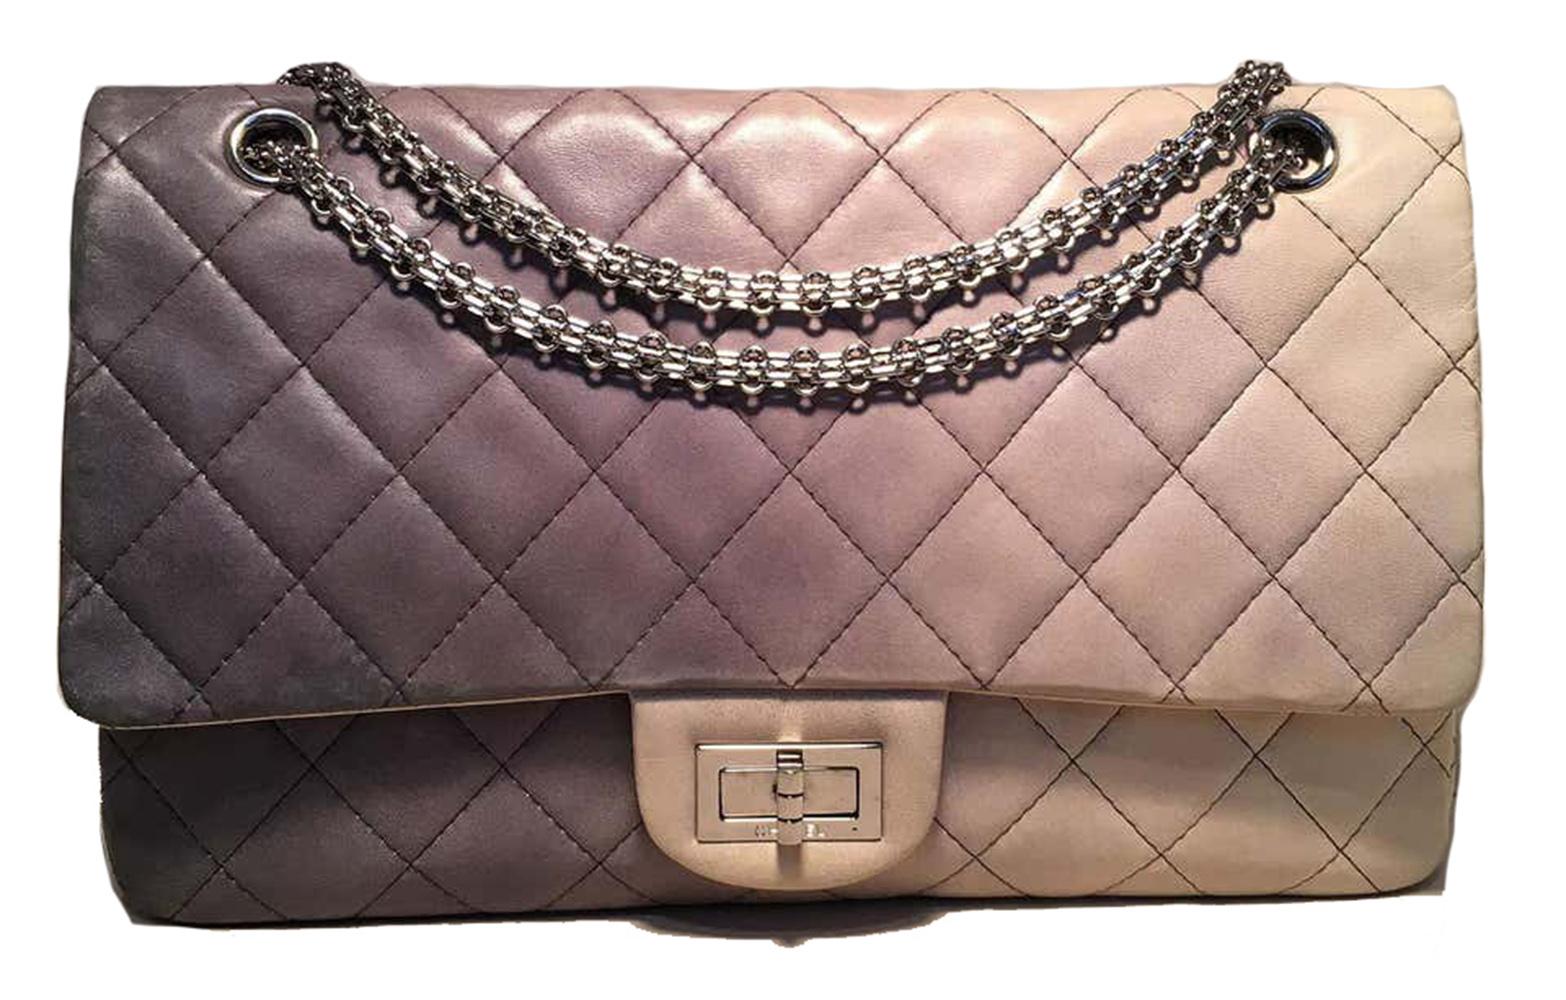 CHANEL Double Hybrid Degrade Ombre Grey Leather 2.55 Reissue 227 Classic Flap 4